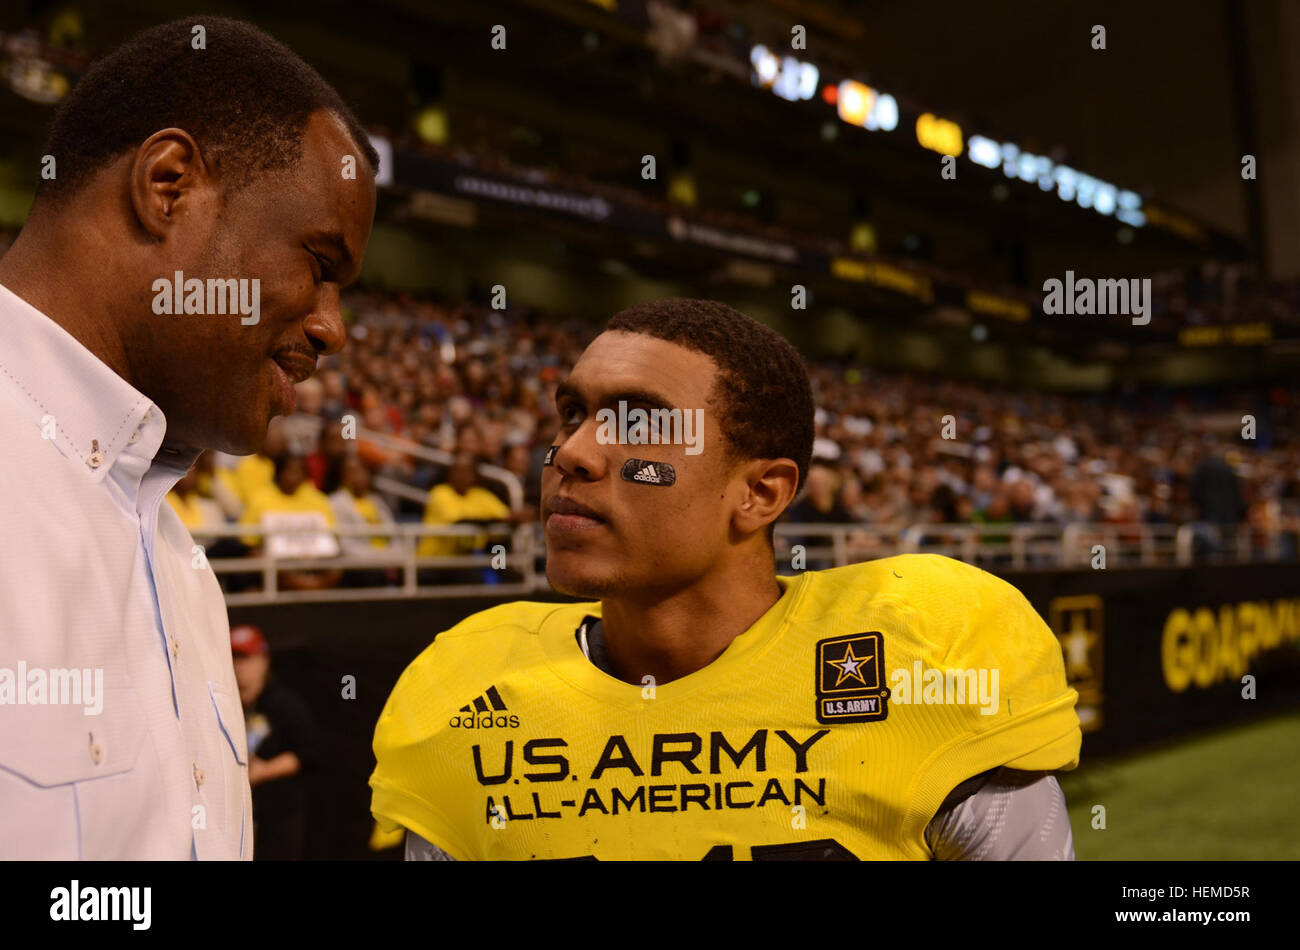 David Robinson, retired from the Spurs, speaks with his son, Corey Robinson, wide receiver for the West team, at the U.S. Army All-American Bowl at the Alamodome in San Antonio on Jan. 5, 2013. The U.S. Army All-American Bowl was sponsored by the U.S. Army. (U.S. Army Reserve photo by Pfc. Victor Blanco, 205th Public Affairs Operations Center) The Admiral and son 130105-A-GX635-429 Stock Photo